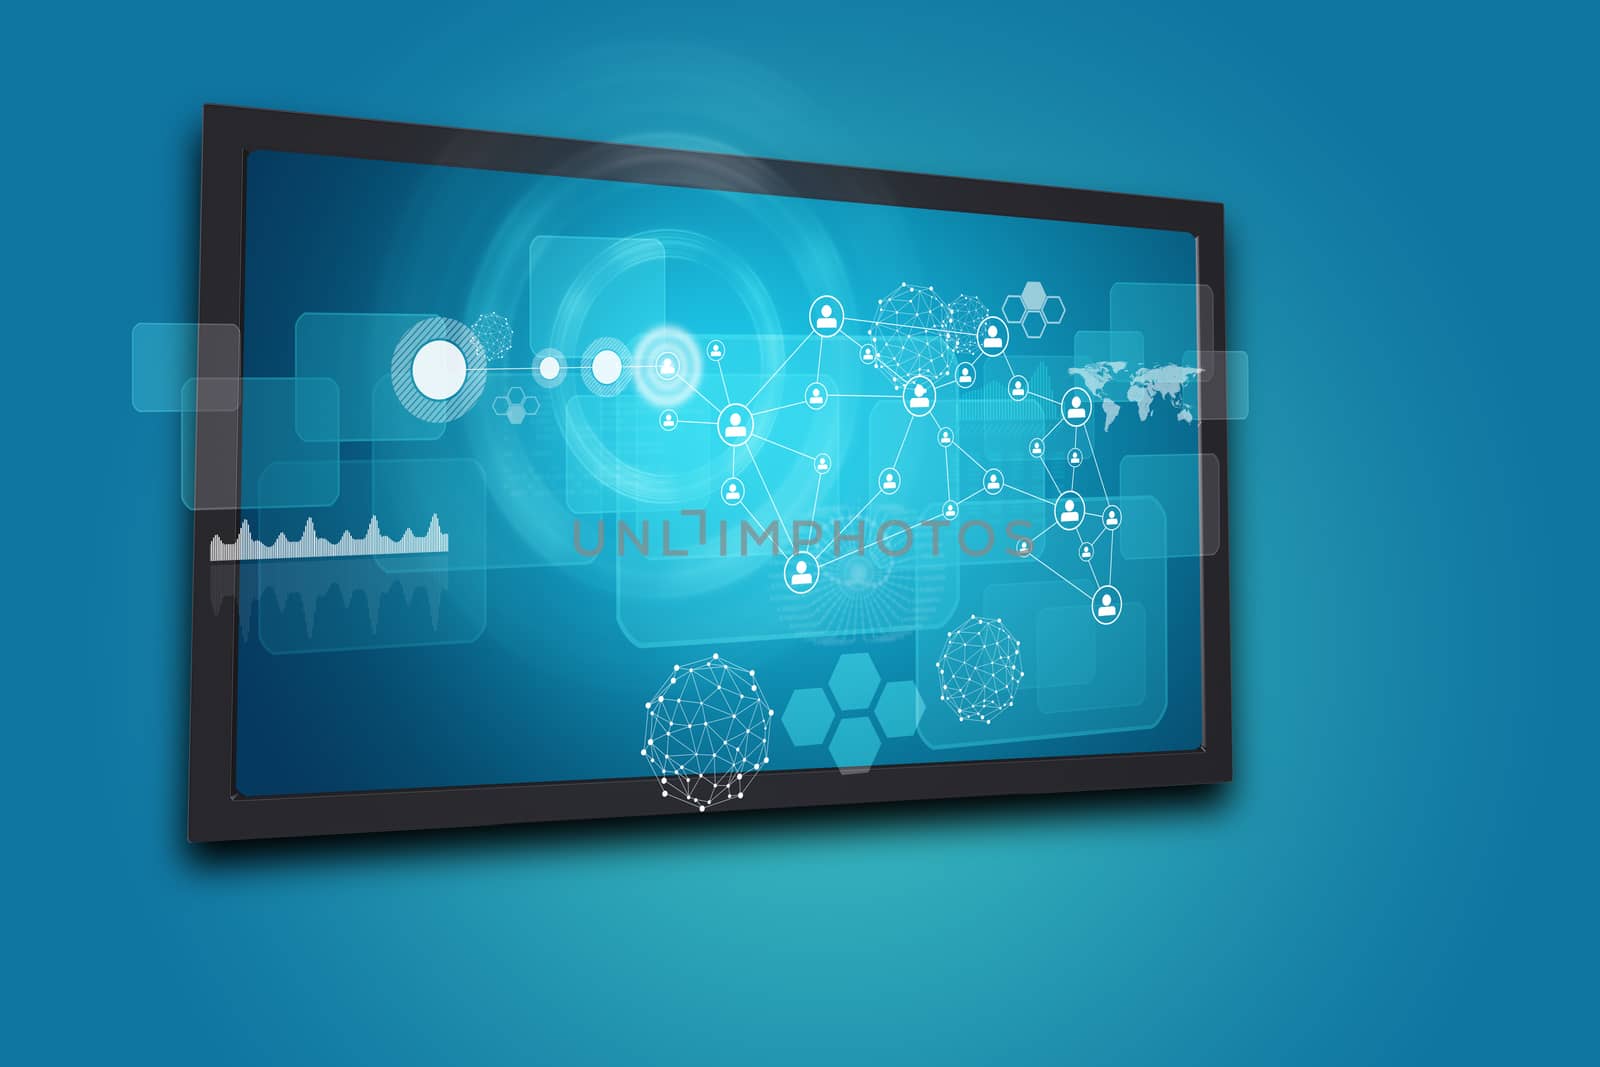 Touchscreen display with network of person icons, graph and other elements, on blue background